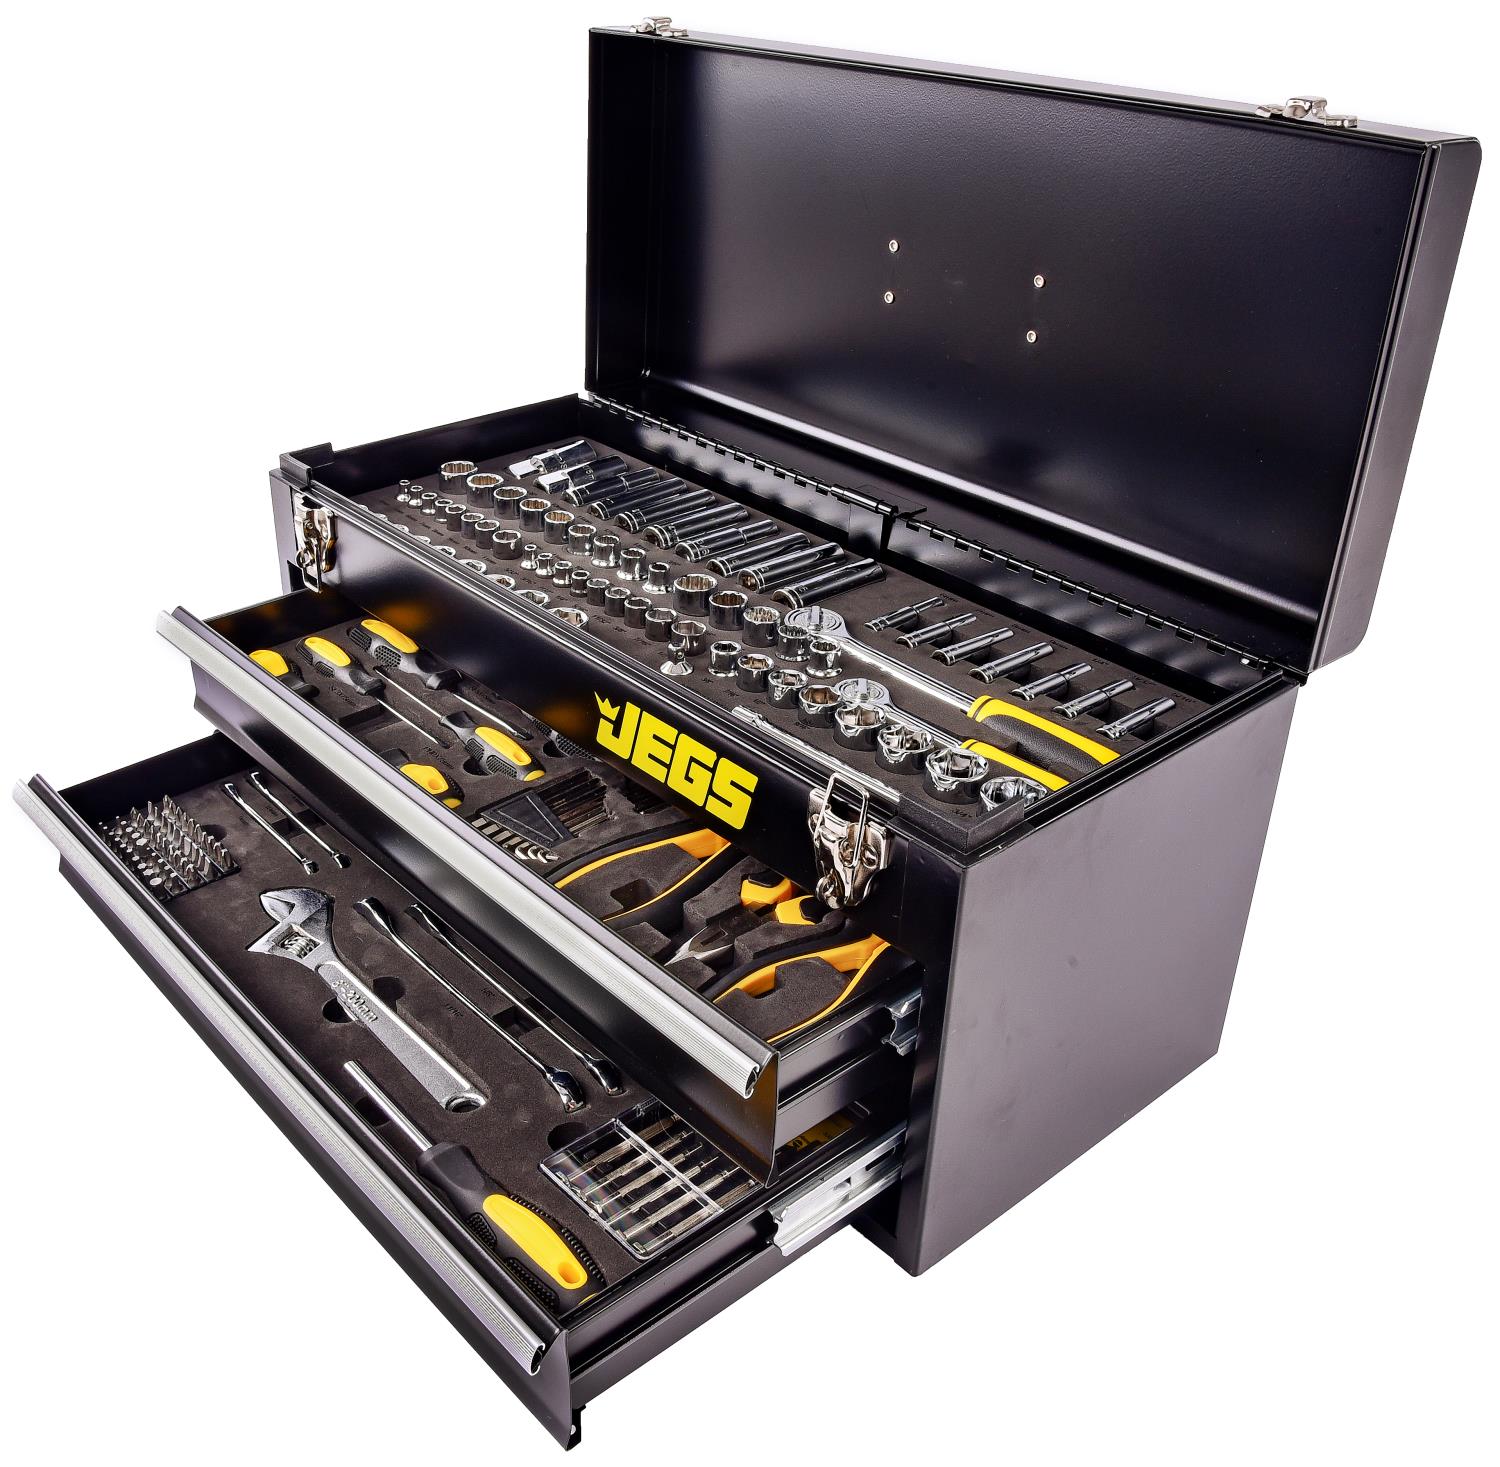 JEGS 85325: Mechanic's Tool Box Set | 170-Piece | Black Powdercoated Steel  | Includes: (1) Tool Box, (67) 1/4 in. & 3/8 in. Sockets, (3) Extenders,  (1) Adapter, (2) Ratchets, (28) Wrenches, (14) Screwdrivers, (3) Pliers,  (50) Bits - JEGS